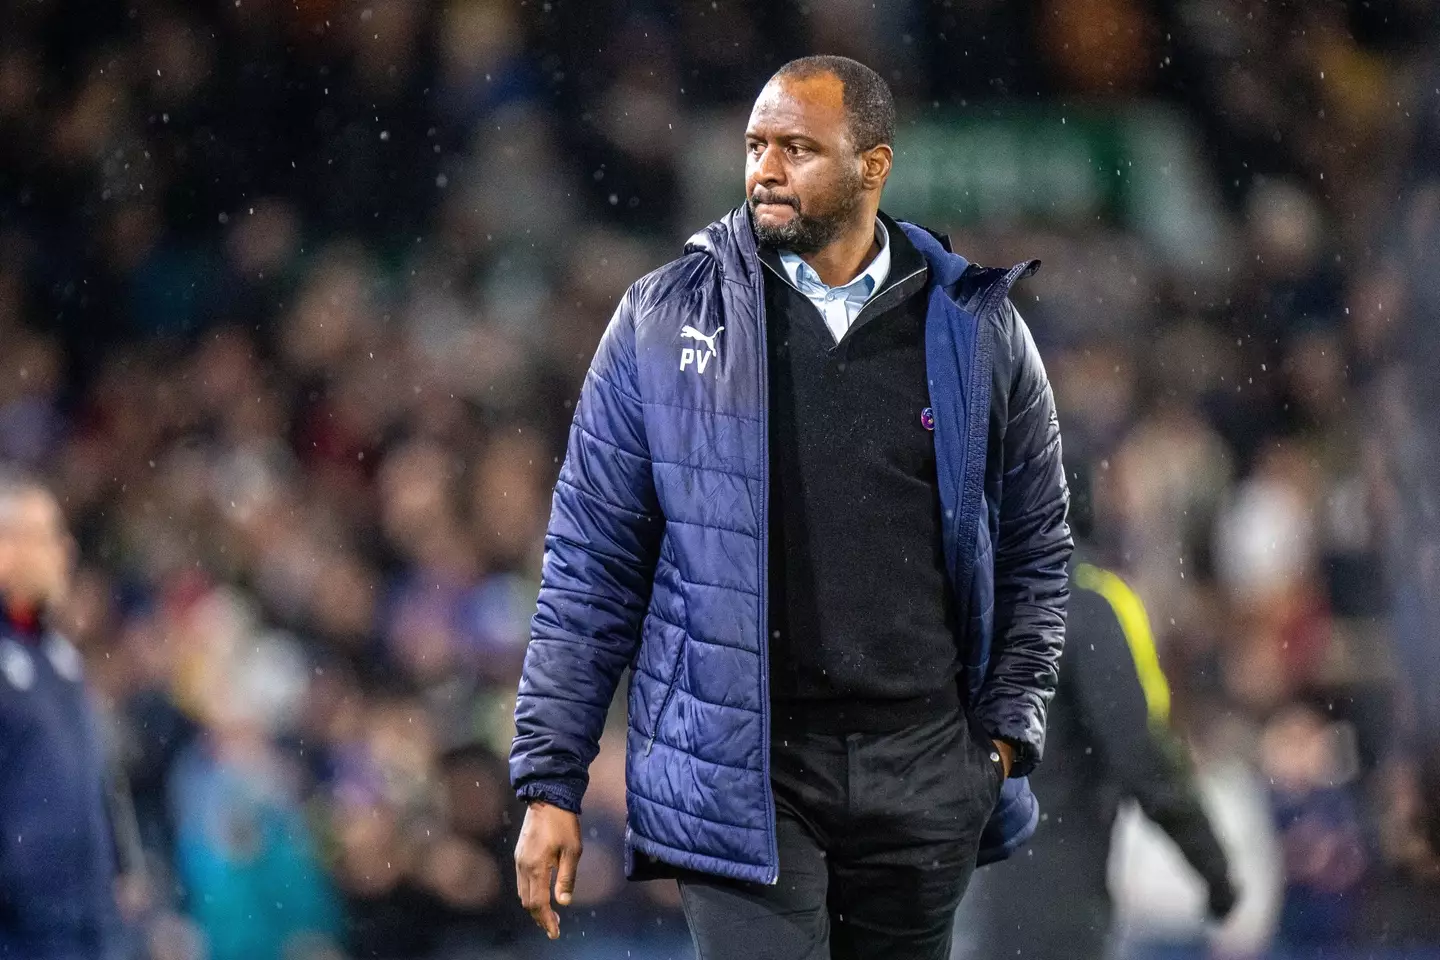 De Jong has tipped Patrick Vieira (pictured) to succeed Guardiola at City (Image: Alamy)